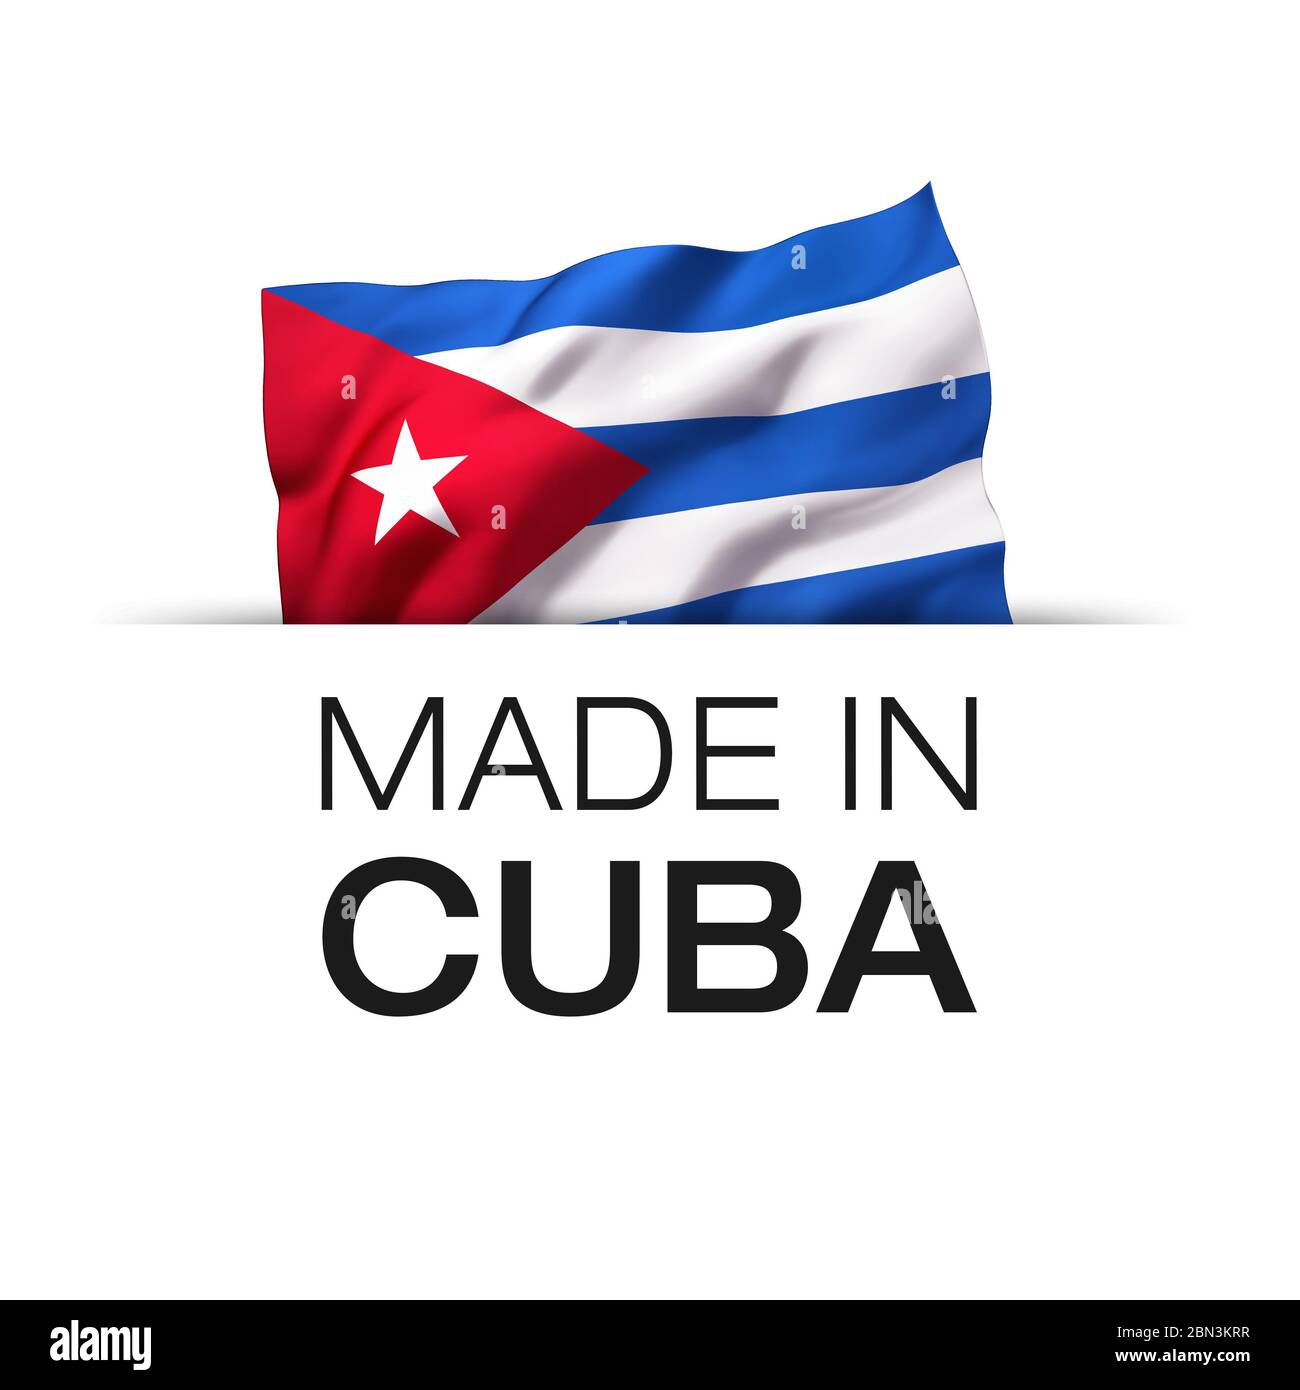 Made in Cuba - Guarantee label with a waving Cuban flag. 3D illustration. Stock Photo